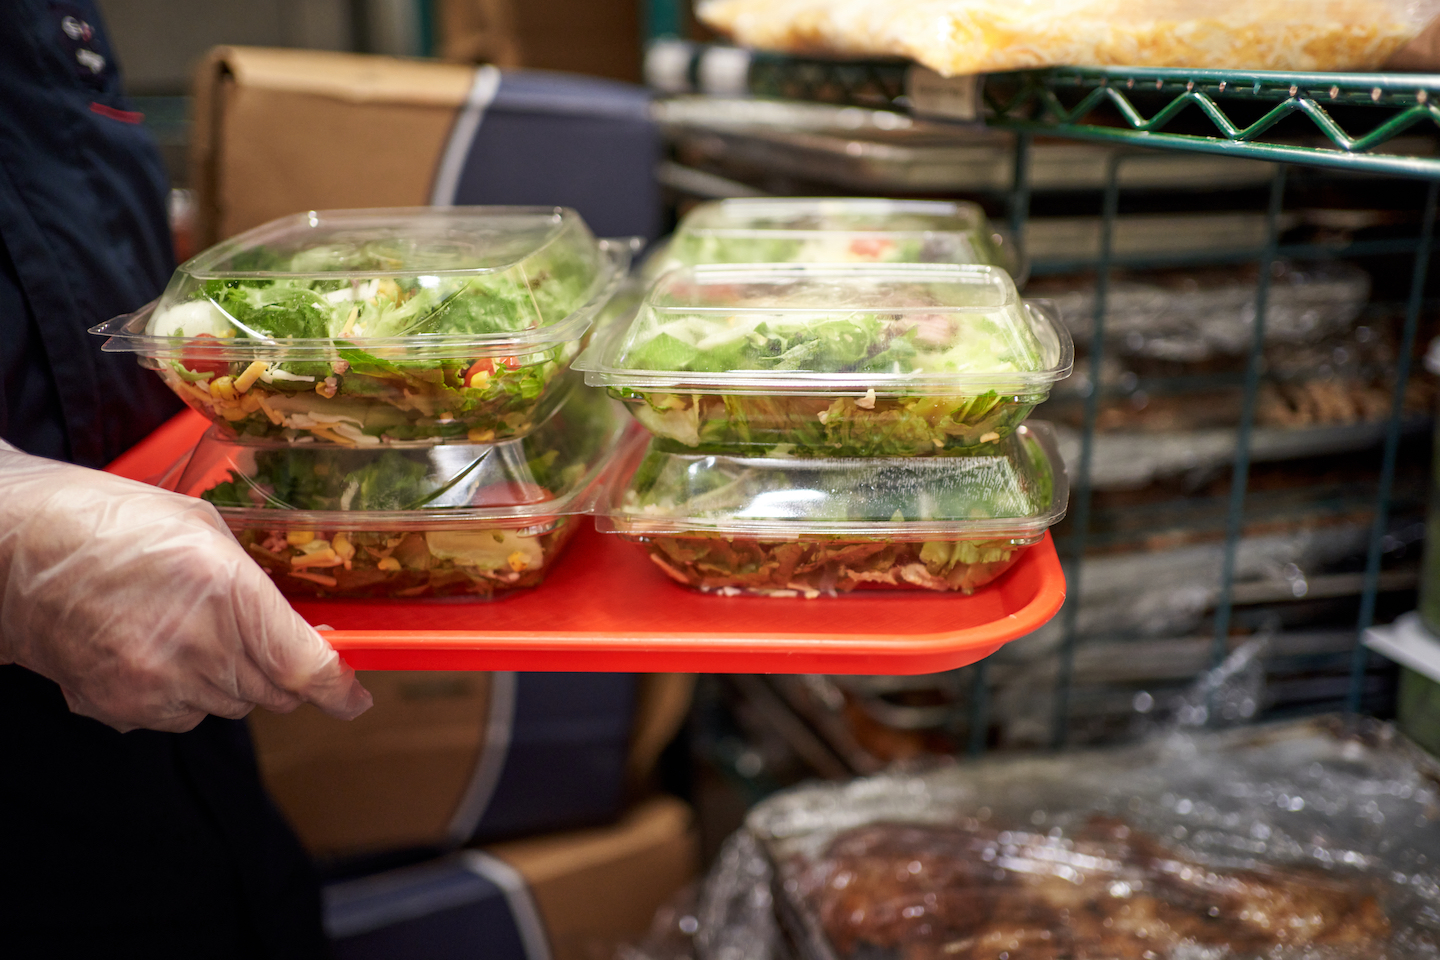 Person carrying a red tray of salads in containers